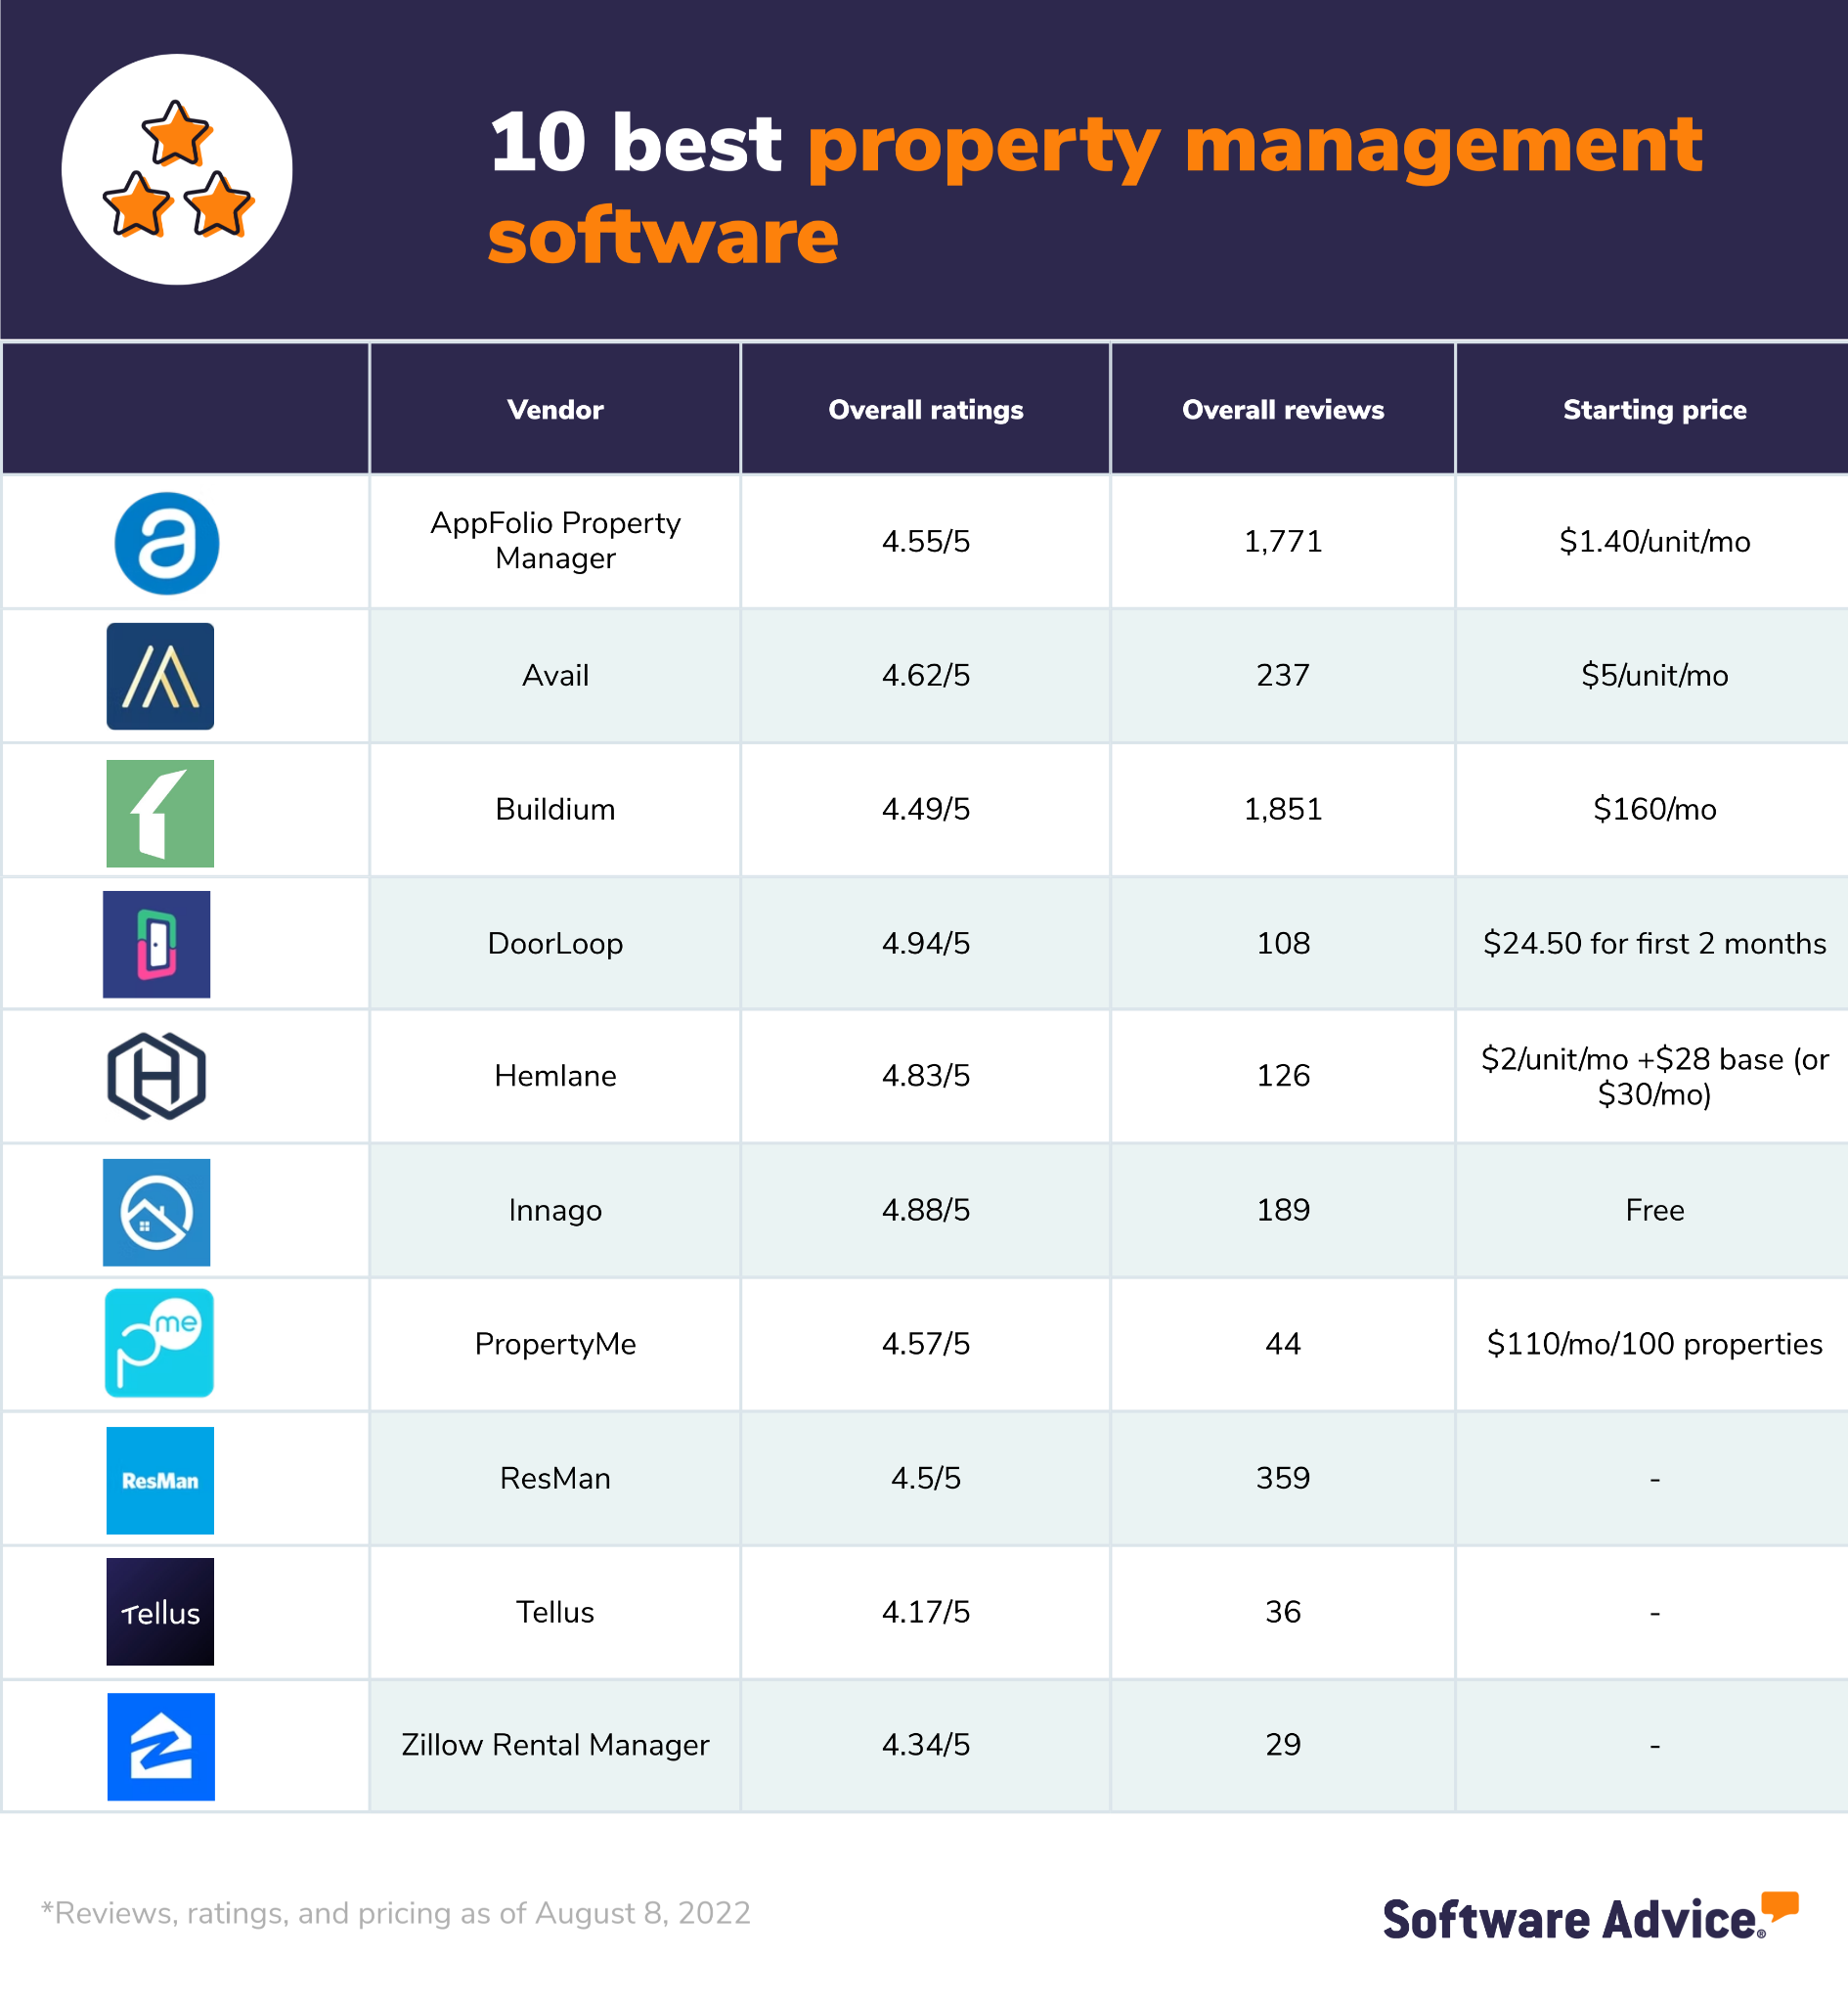 This-graphic-lists-the-10-best-property-management-software-based-on-user-reviews.